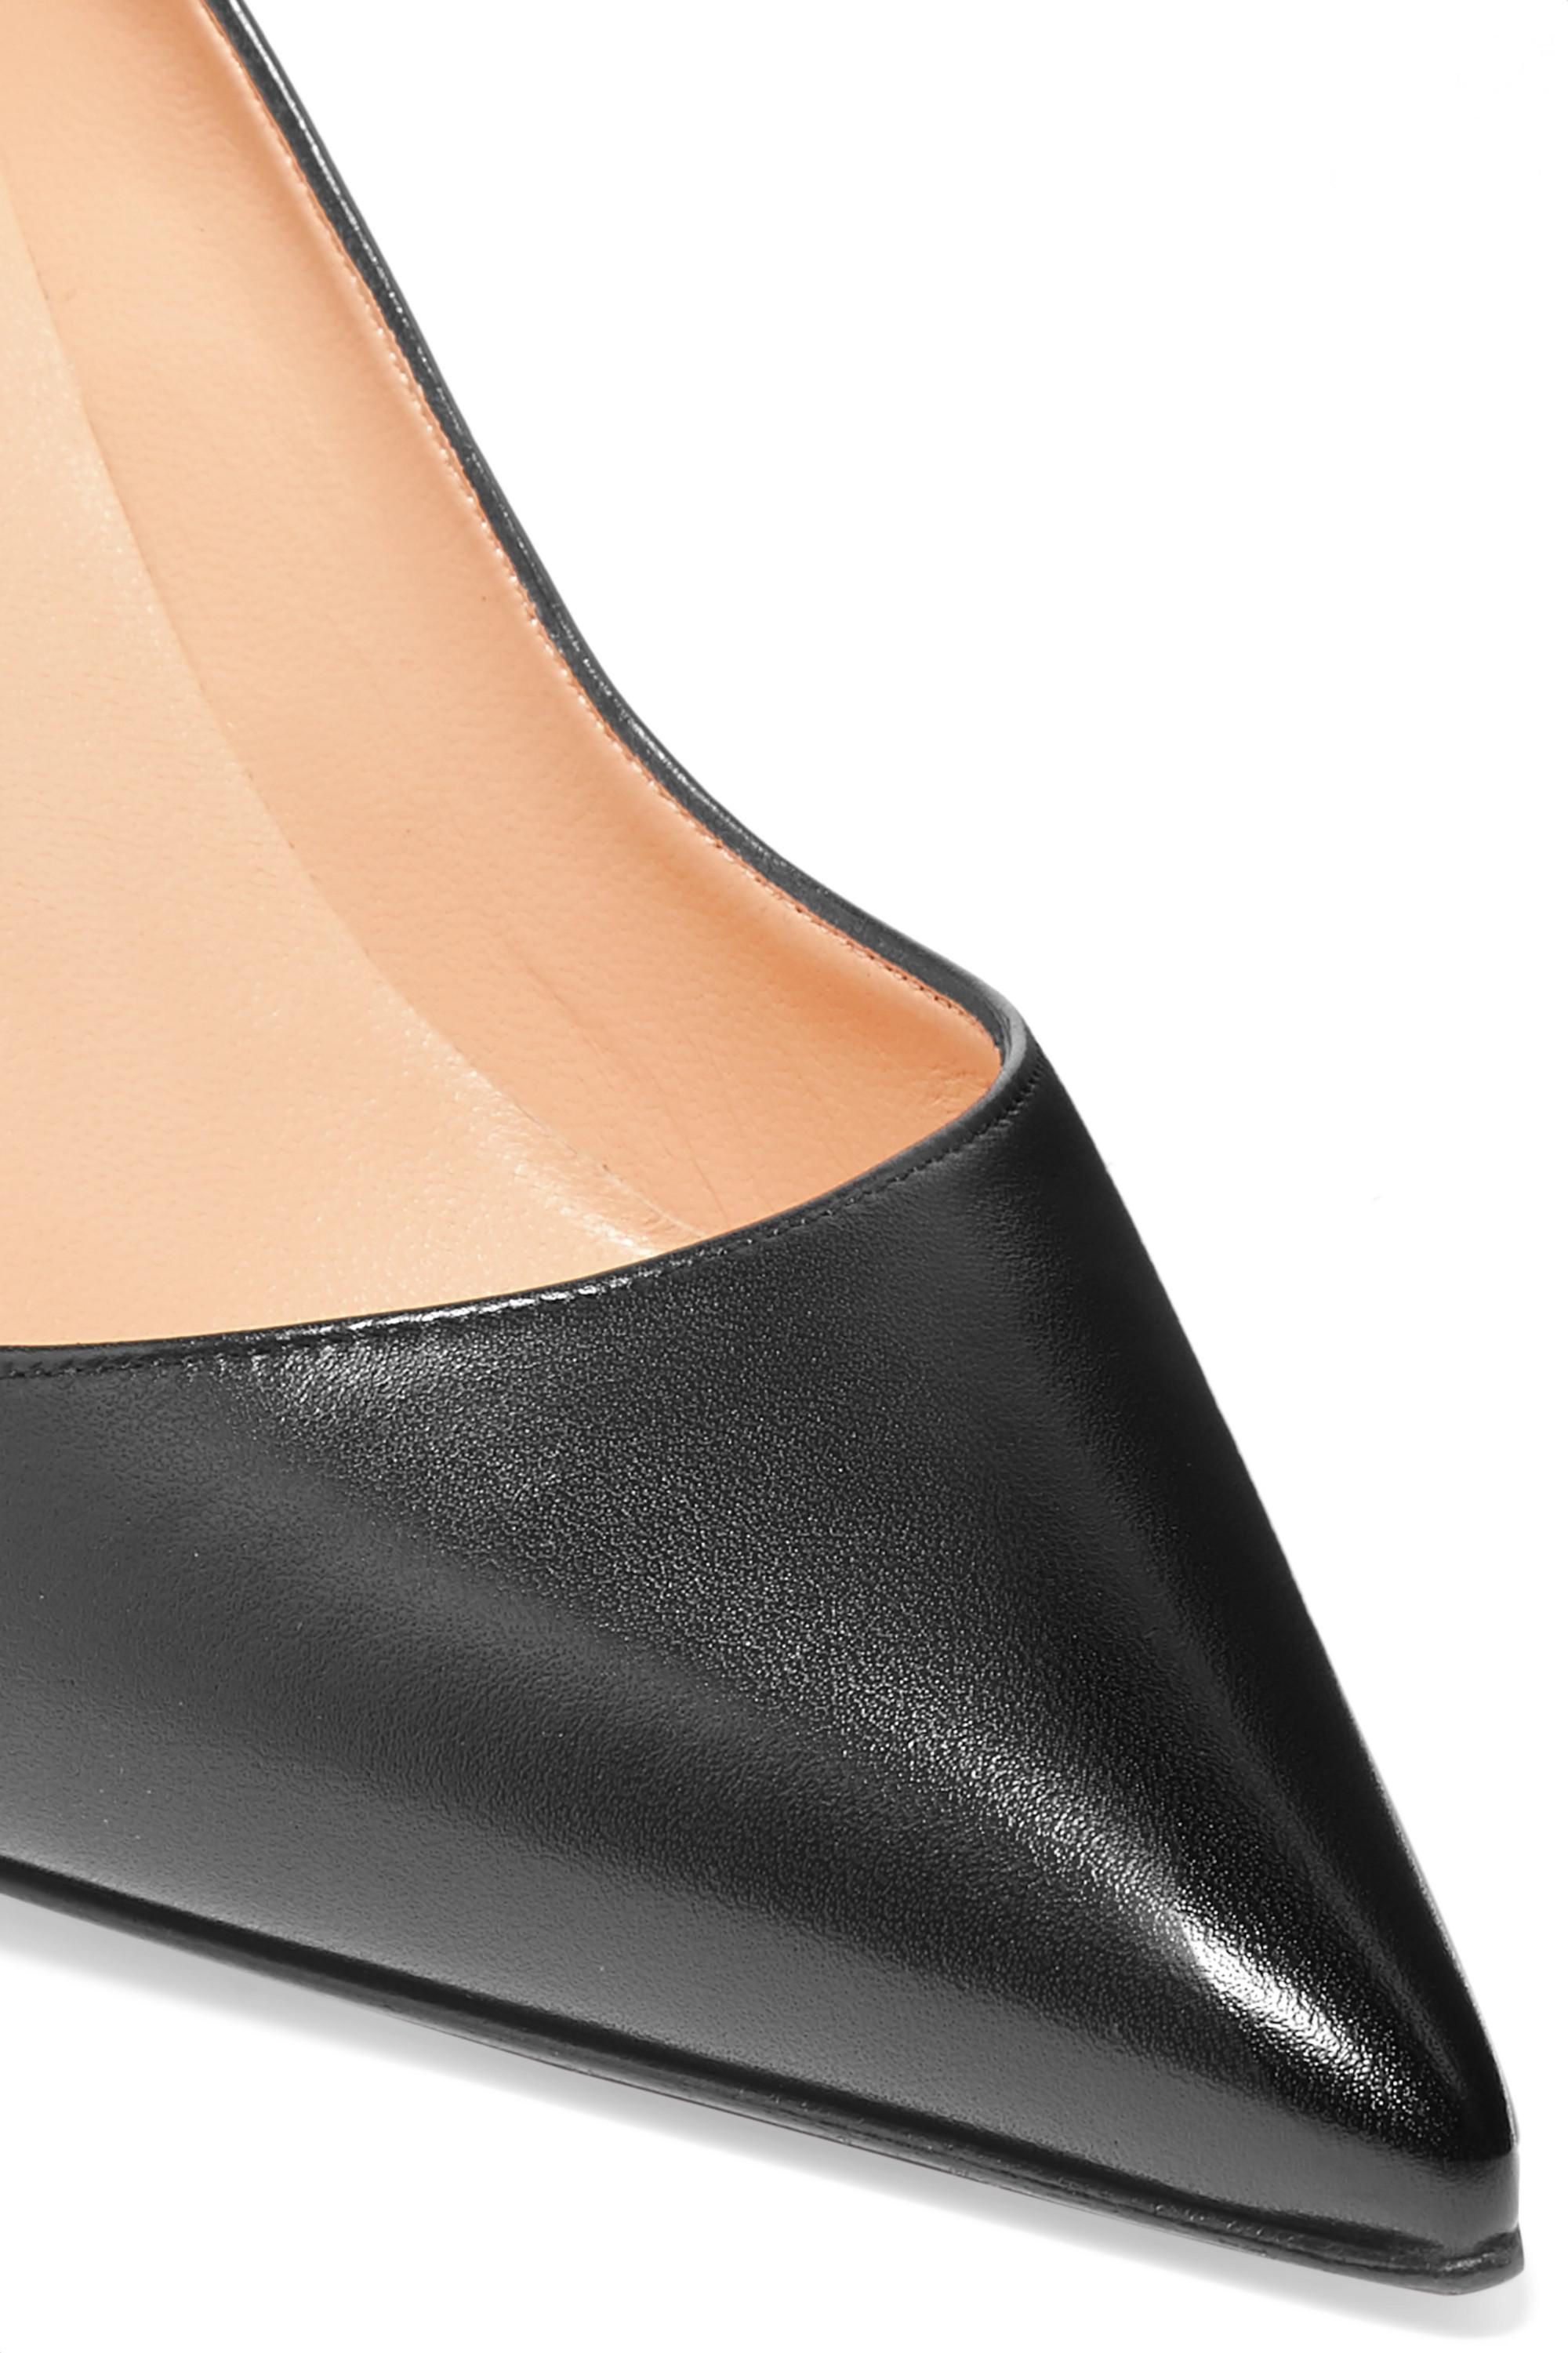 Christian Louboutin Clare 80 Leather Pump in Black | Lyst